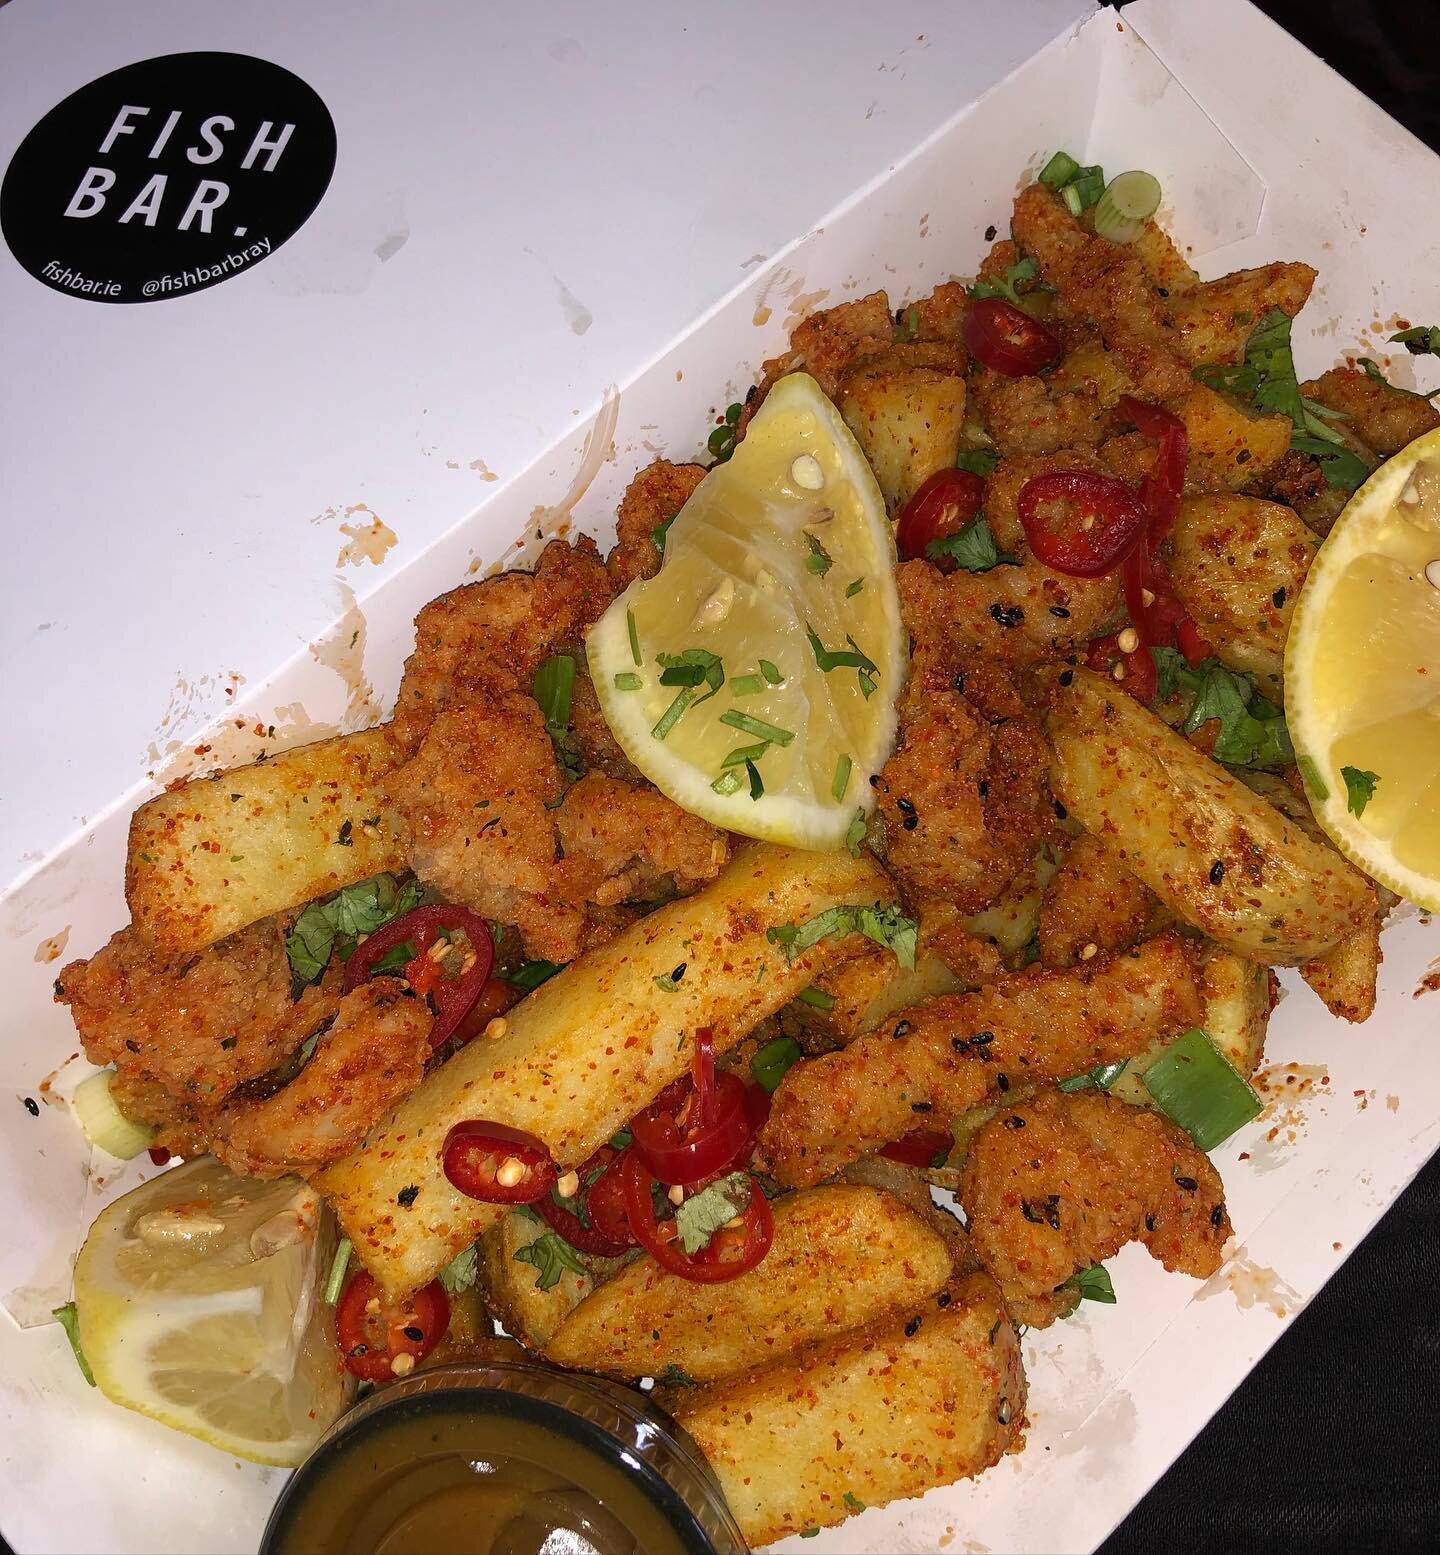 Serving up our famous @fishbarbray &ldquo;Spice Box&rdquo; all evening today, alongside your seafood faves. Get down to @theharbourbar to try them out 🥰